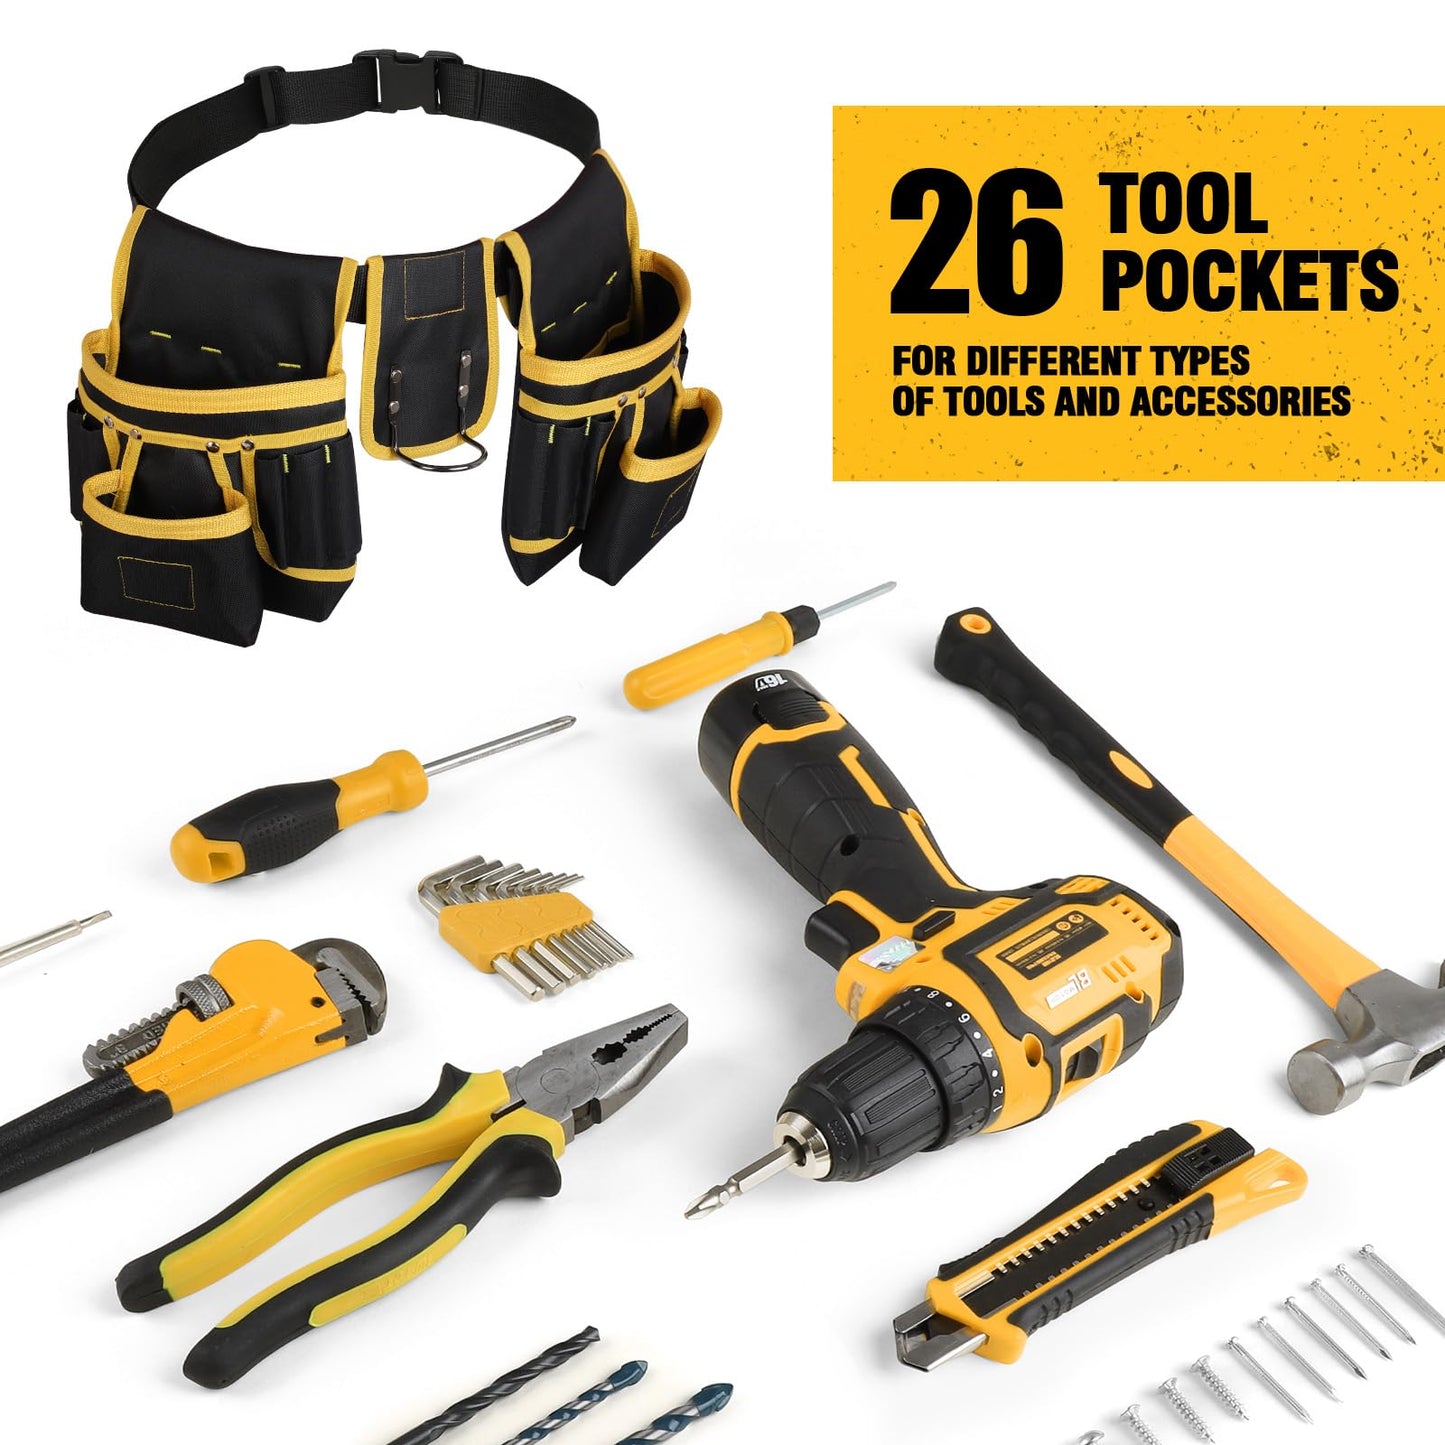 UUP Tool Belt, Magnetic Tool Pouch with 26 Pockets, Heavy Duty Work Belt Tool Organizer, Utility Waist Apron Drill Holder for Home DIY, Carpenter,